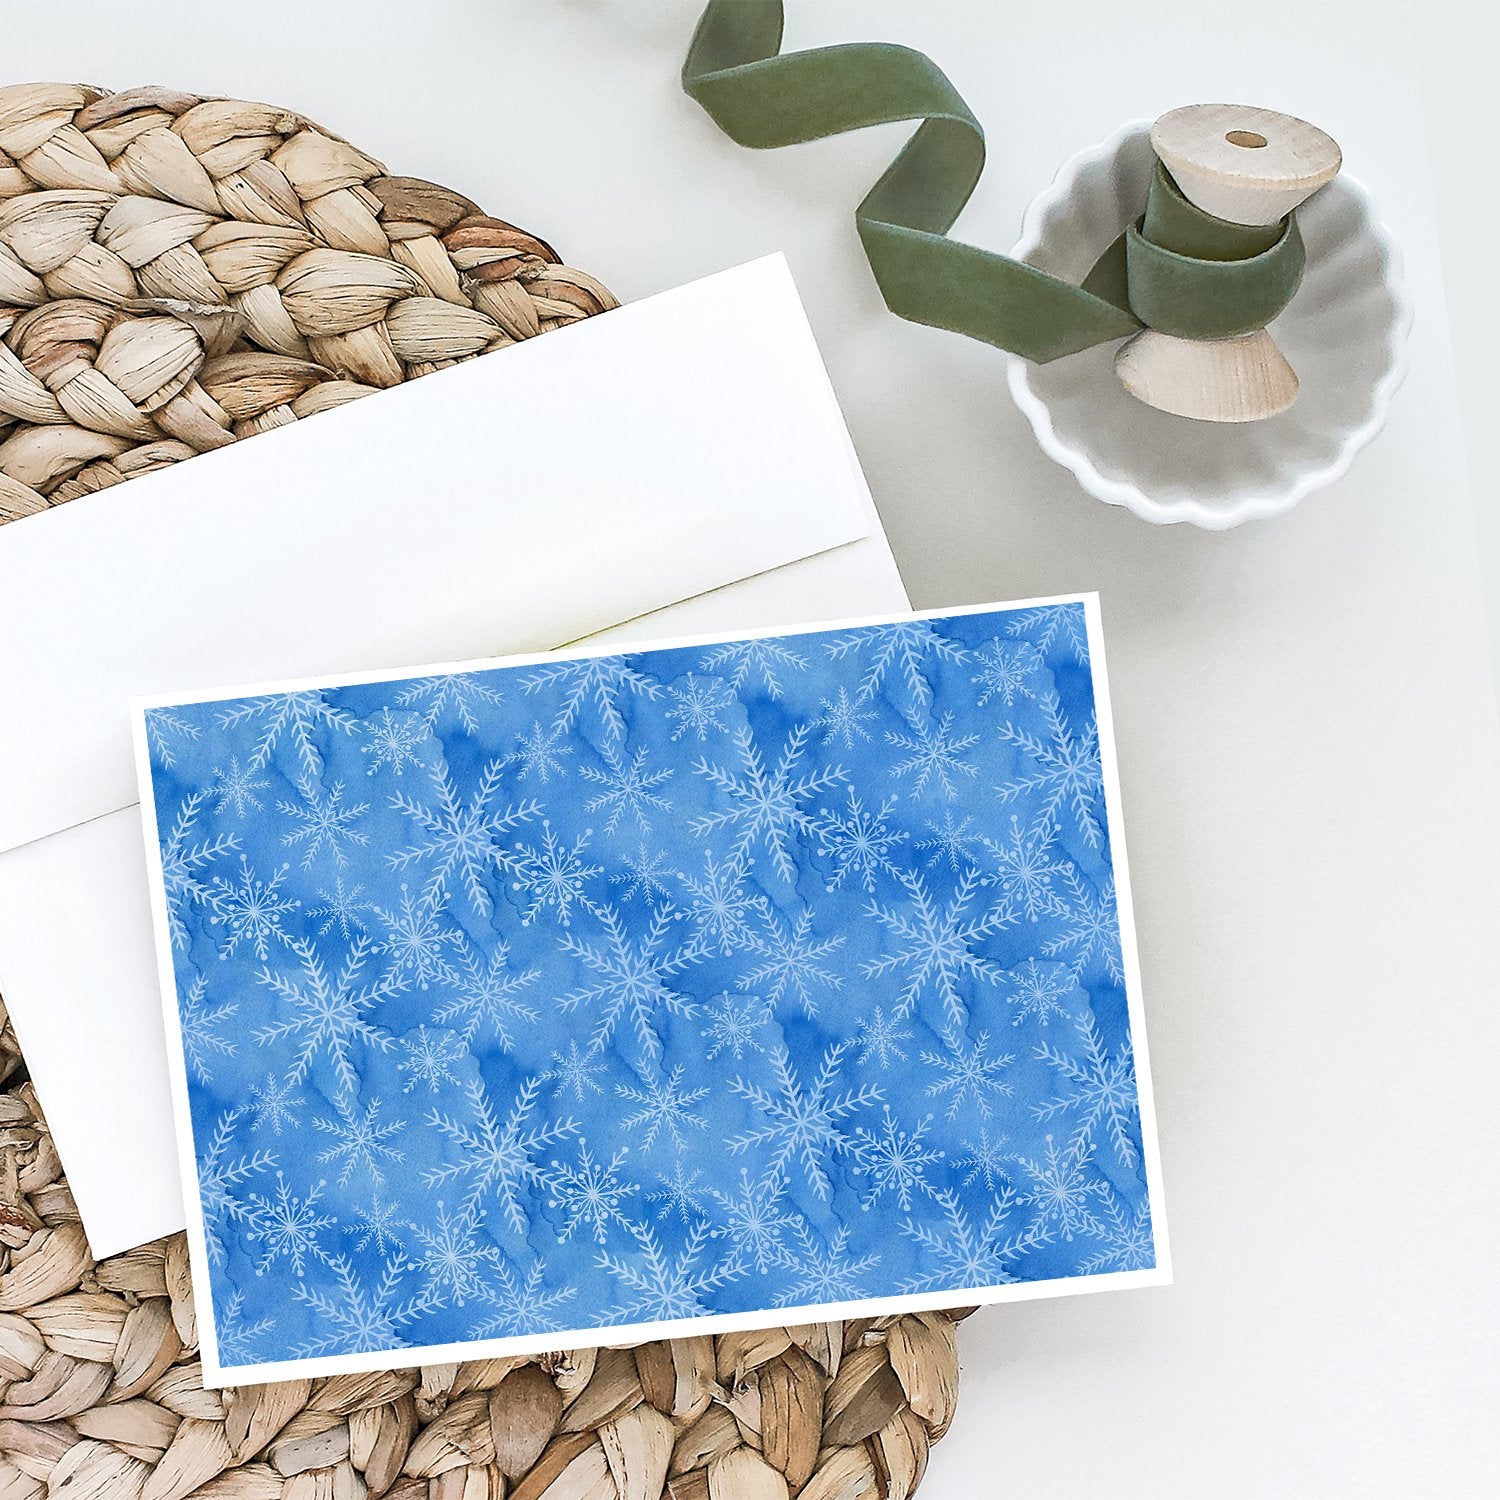 Buy this Watercolor Dark Blue Winter Snowflakes Greeting Cards and Envelopes Pack of 8